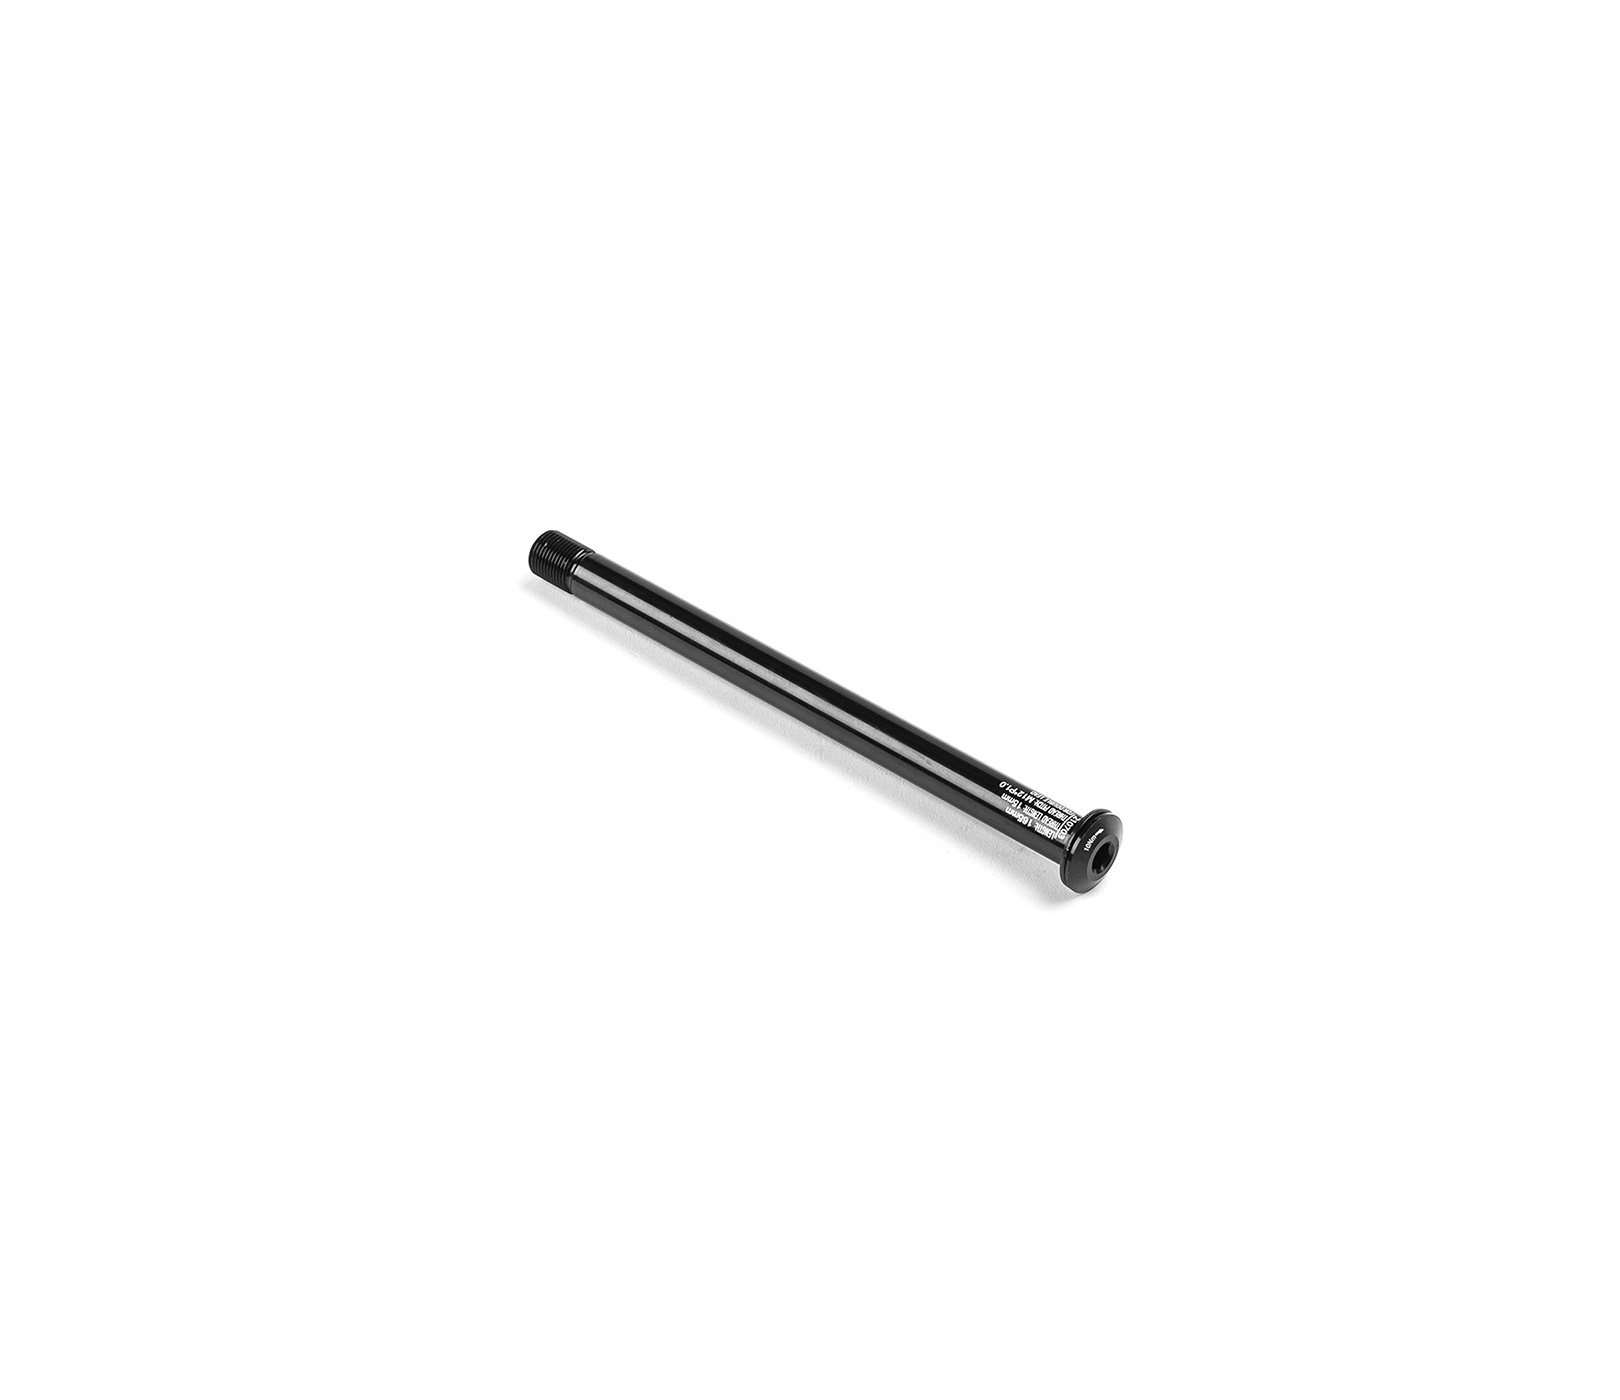 FRONT AXLE 12x165 (2P1.0x15) INTEGRATED M/GUARD THREAD